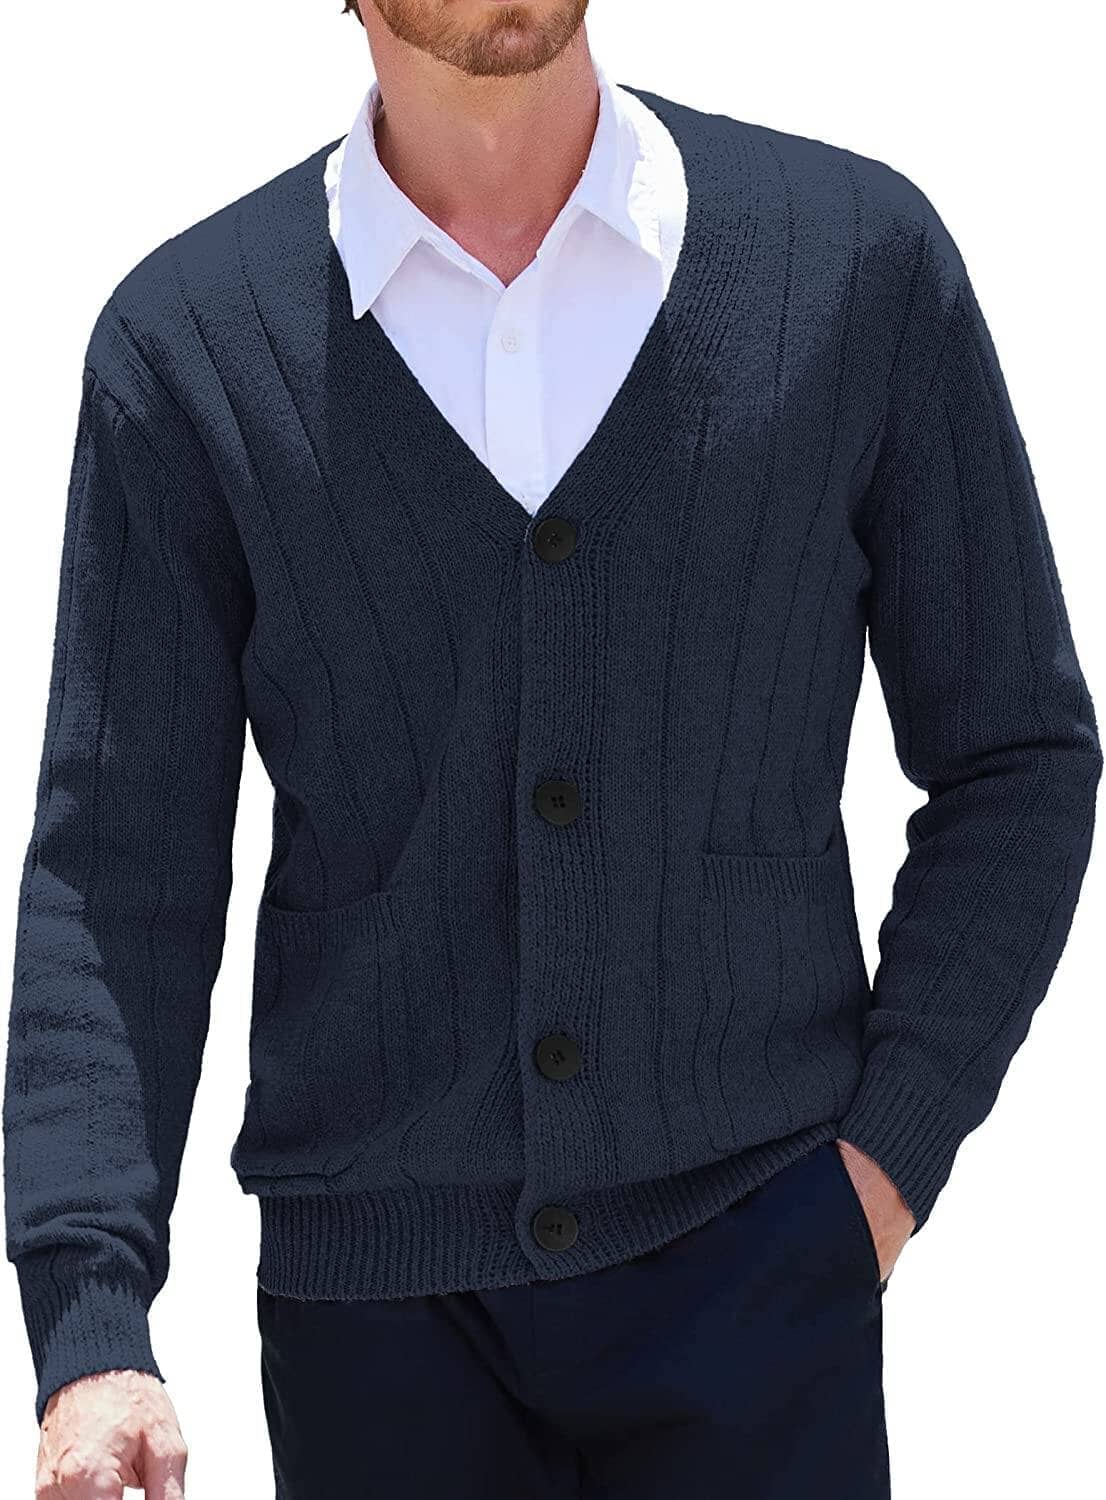 Cardigan Knit V Neck Button up Sweaters (US Only) Sweaters COOFANDY Store Navy Blue S 